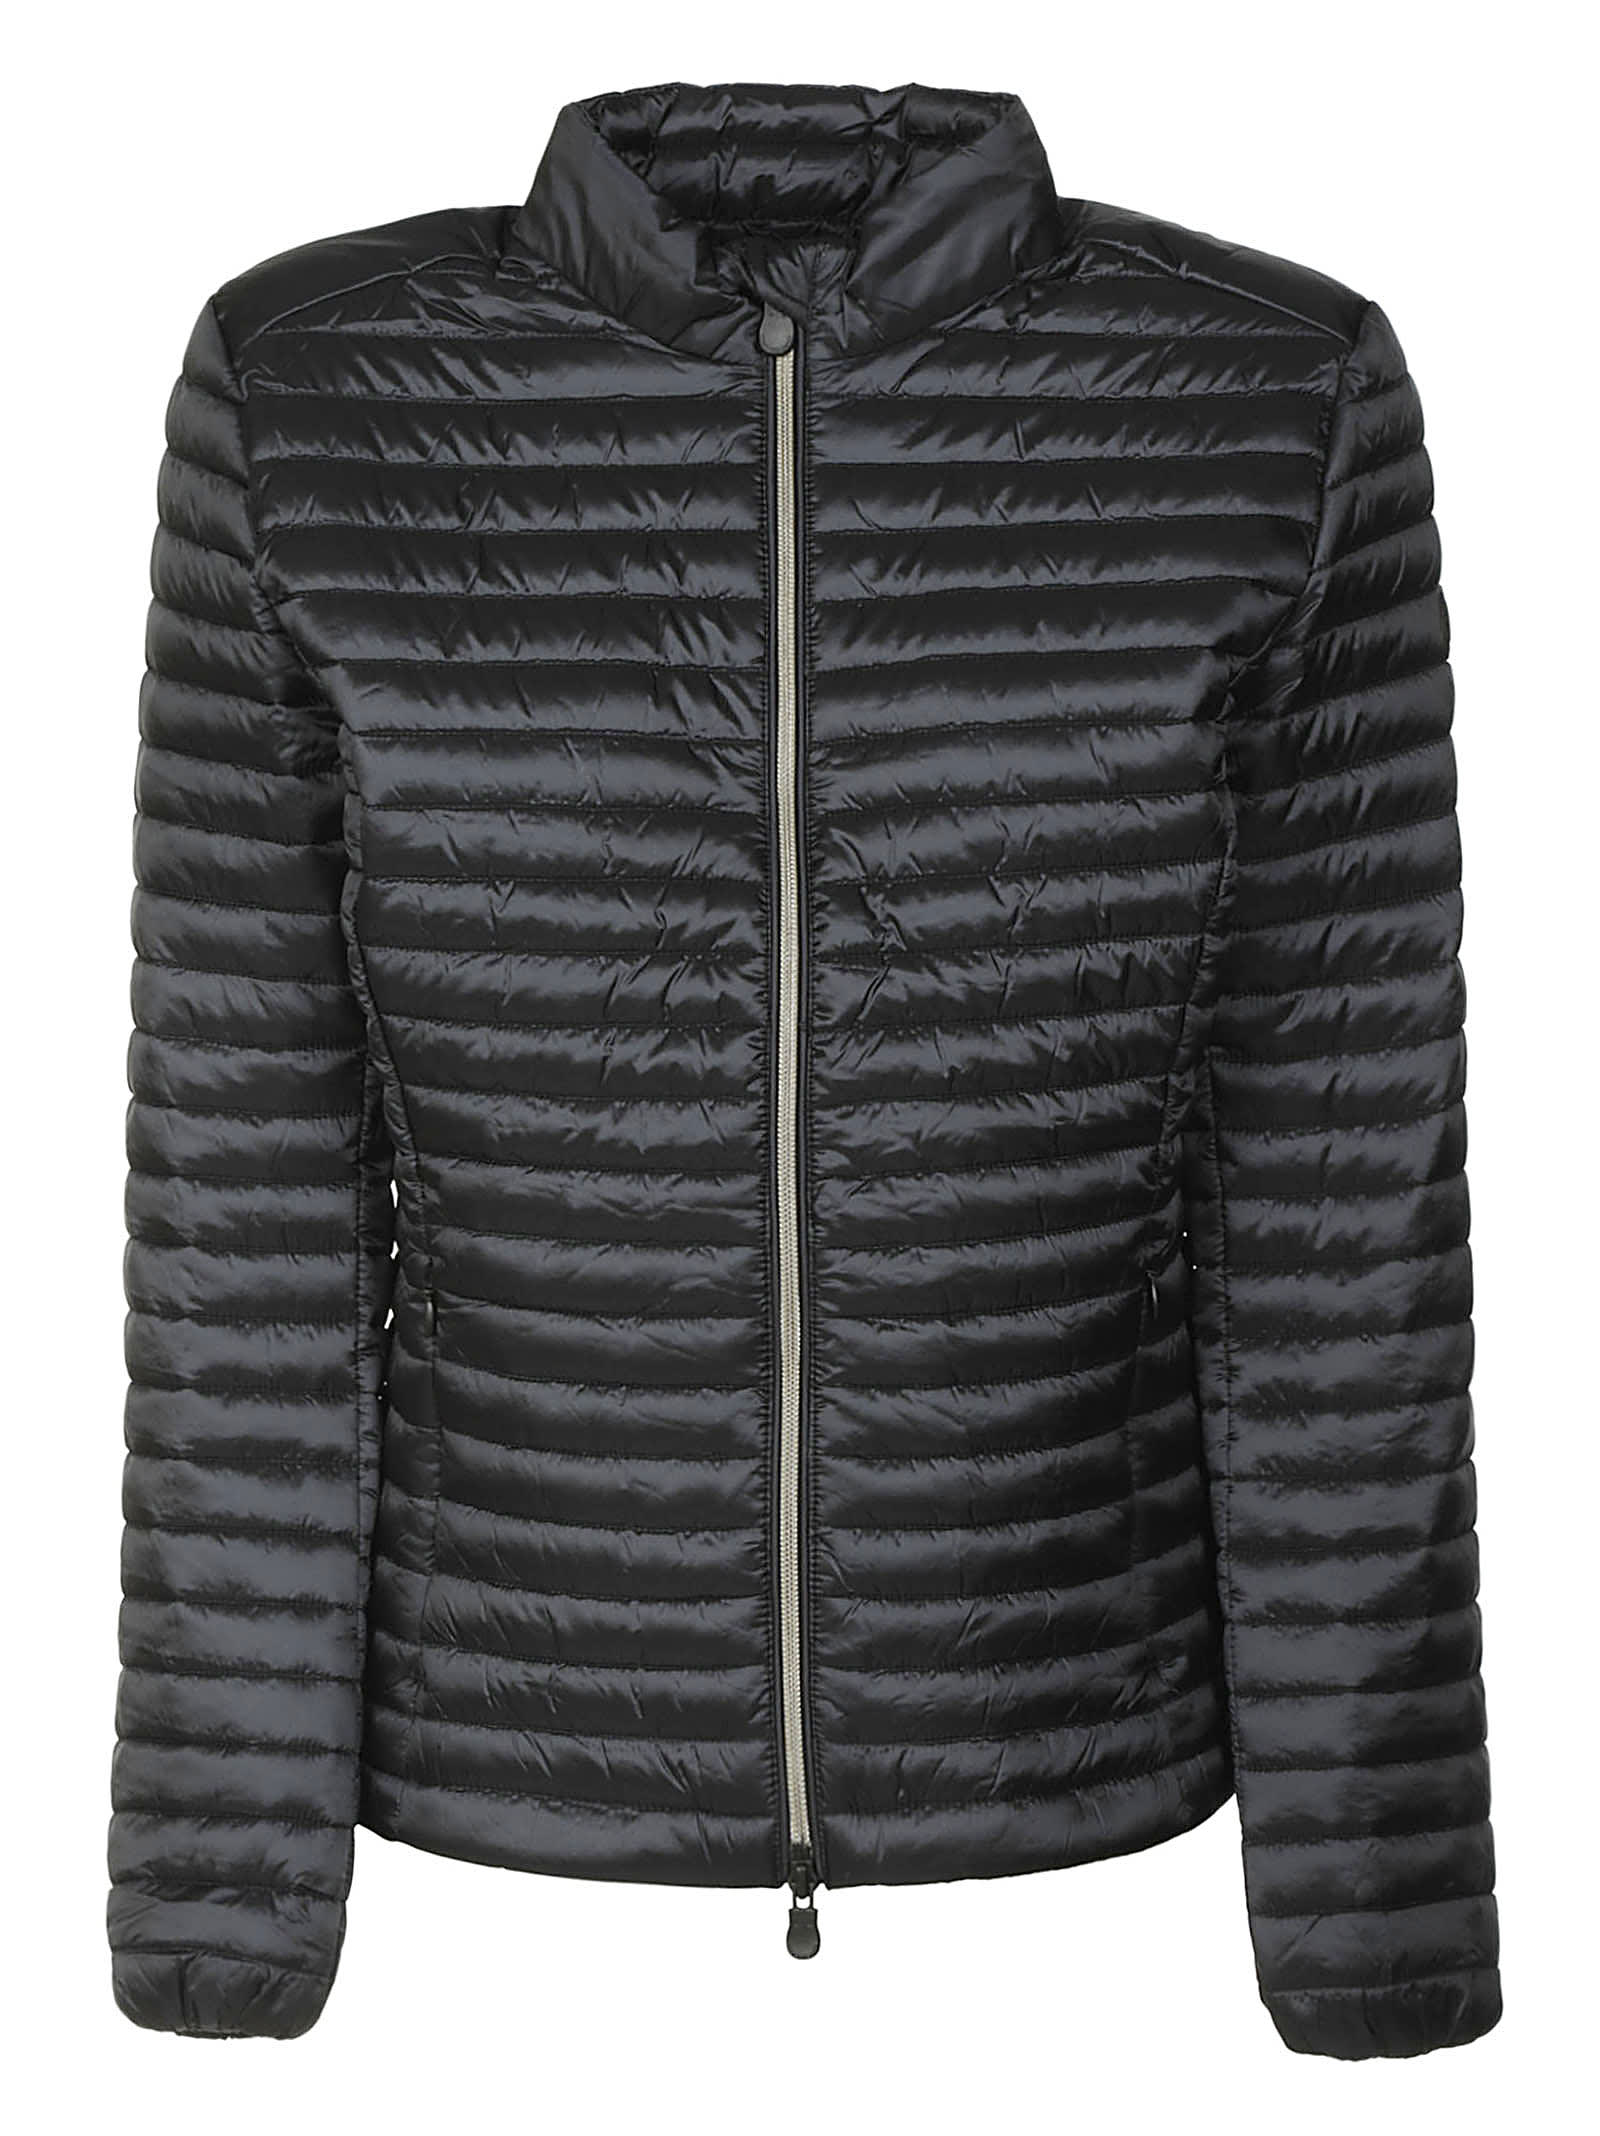 Andreina Padded Jacket Save the Duck